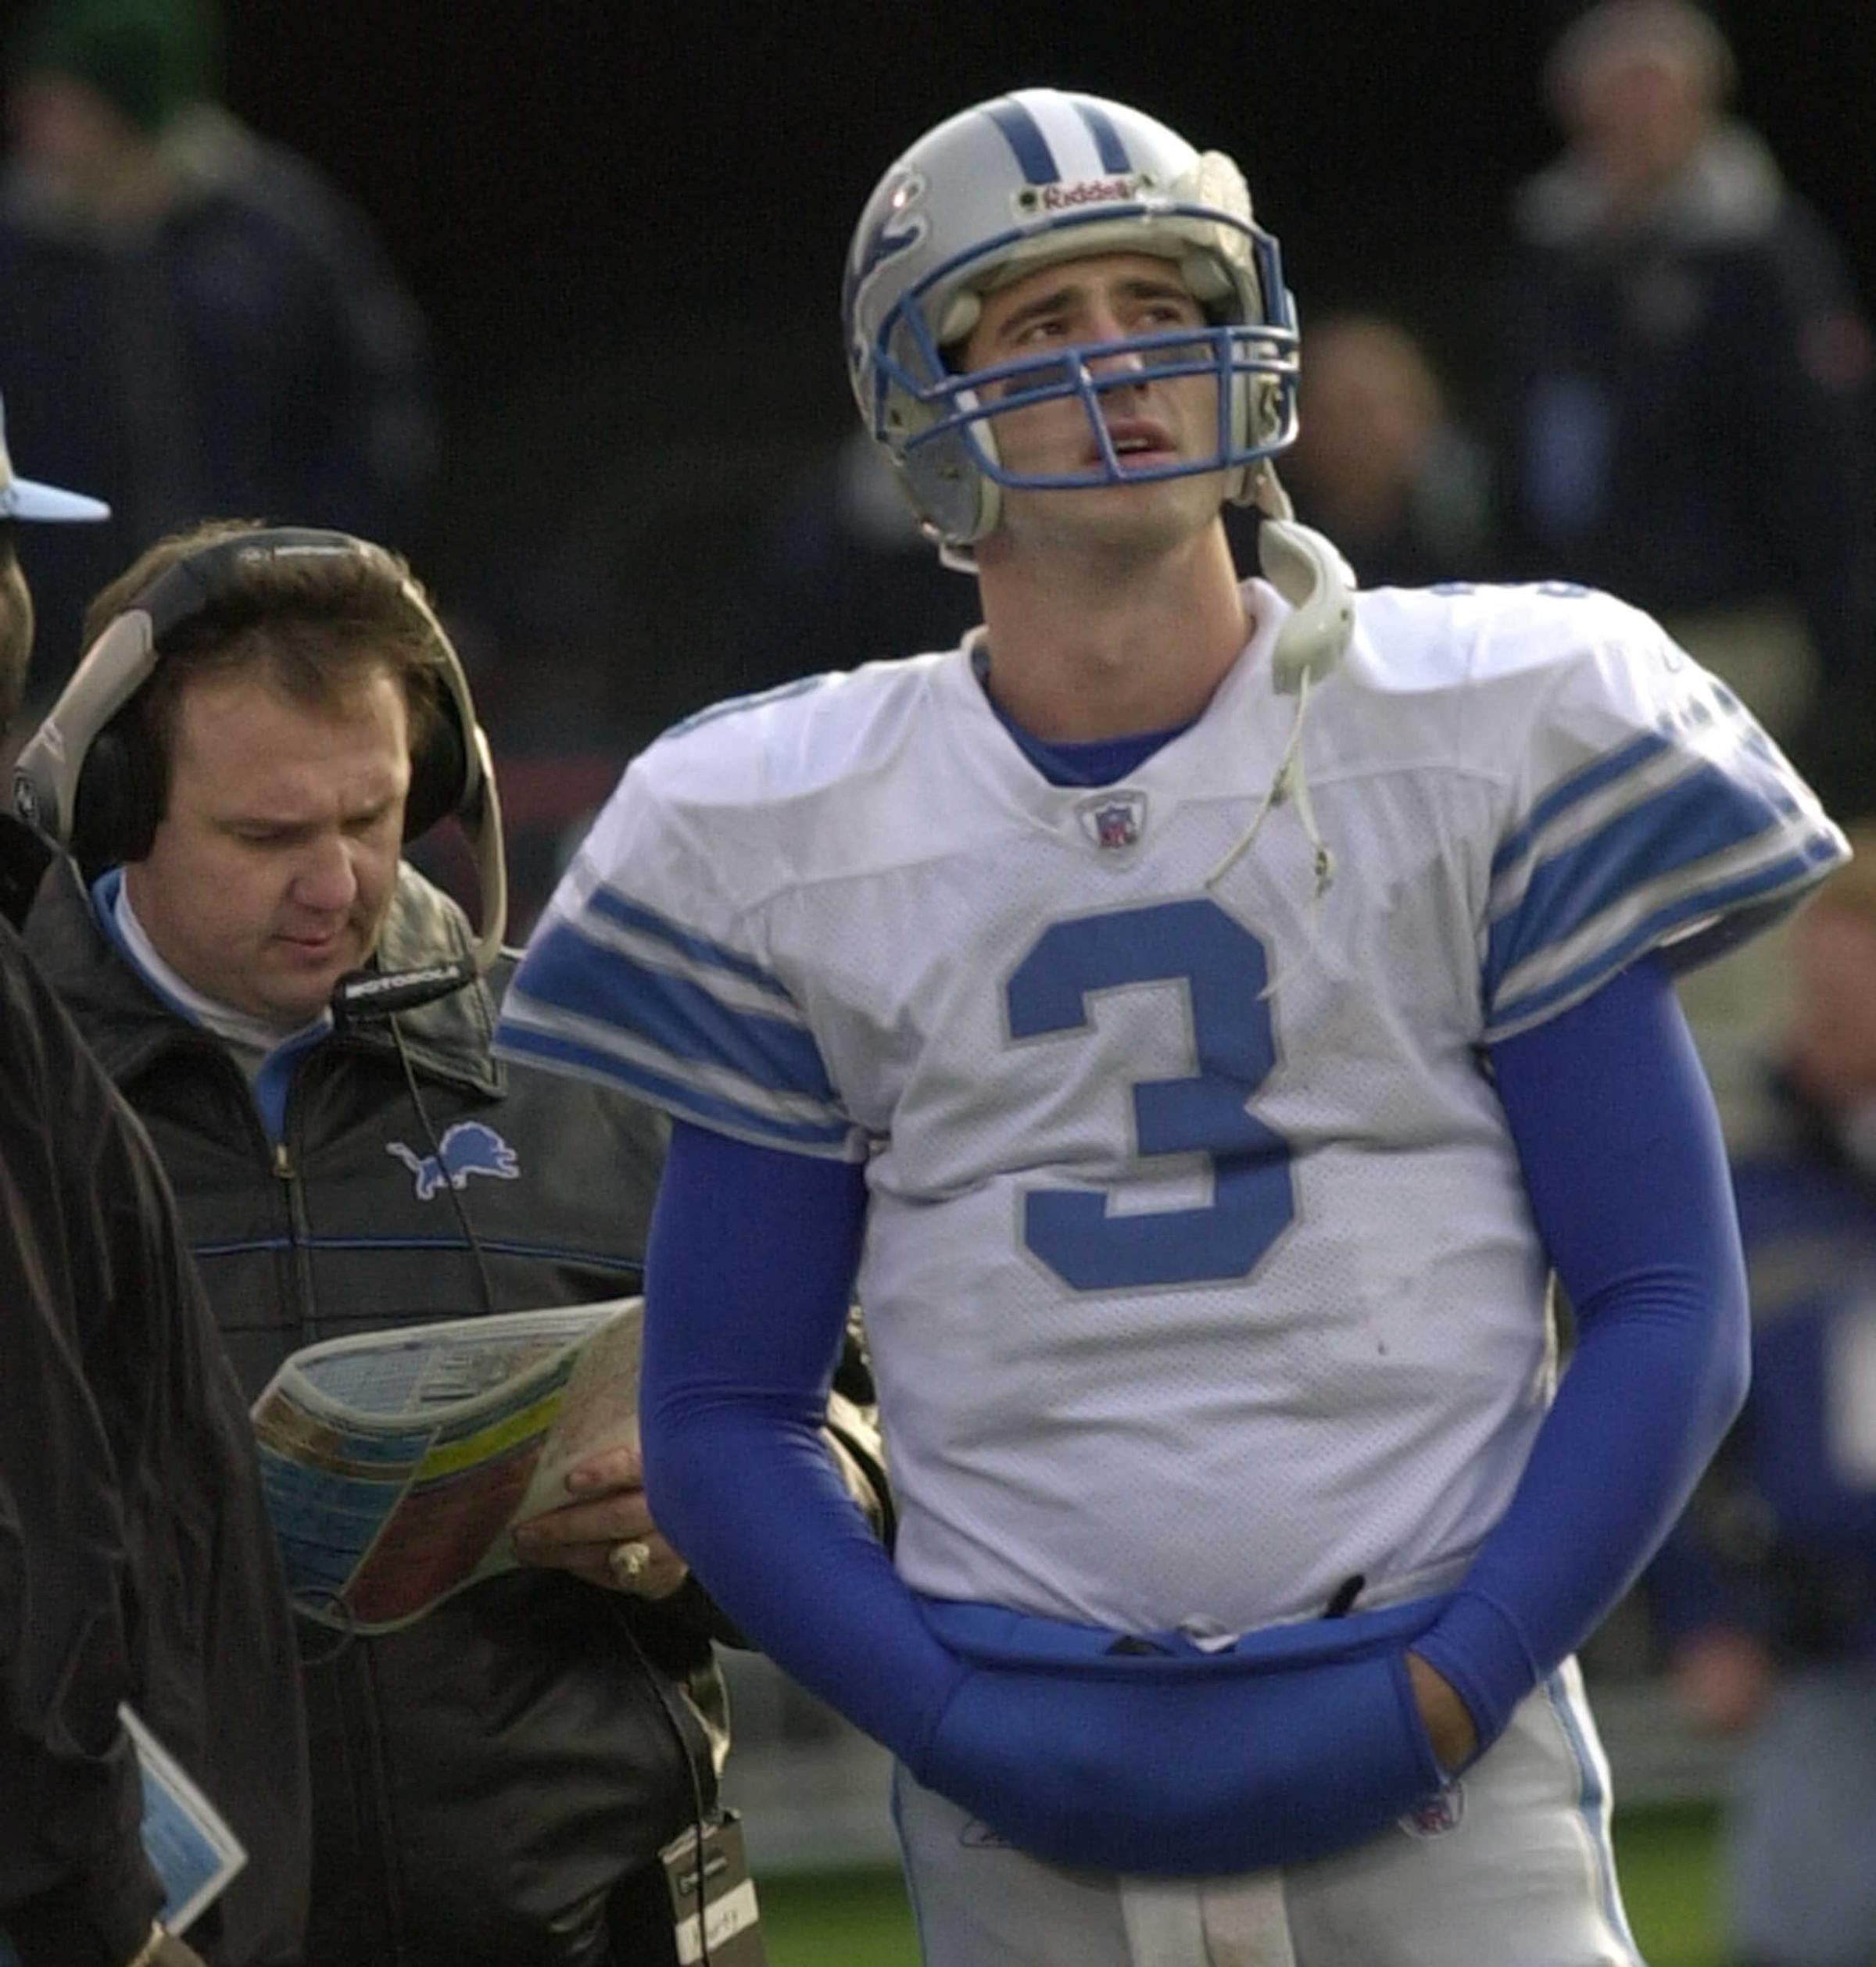 Detroit Lions quarterback Joey Harrington (3) looks at the scoreboard as coach Marty Mornhinweg looks over a playbook during the fourth quarter against the Chicago Bears in Champaign, Ill., Sunday, Nov. 24, 2002. The Bears won 20-17 in overtime. (AP Photo/Charles Rex Arbogast)